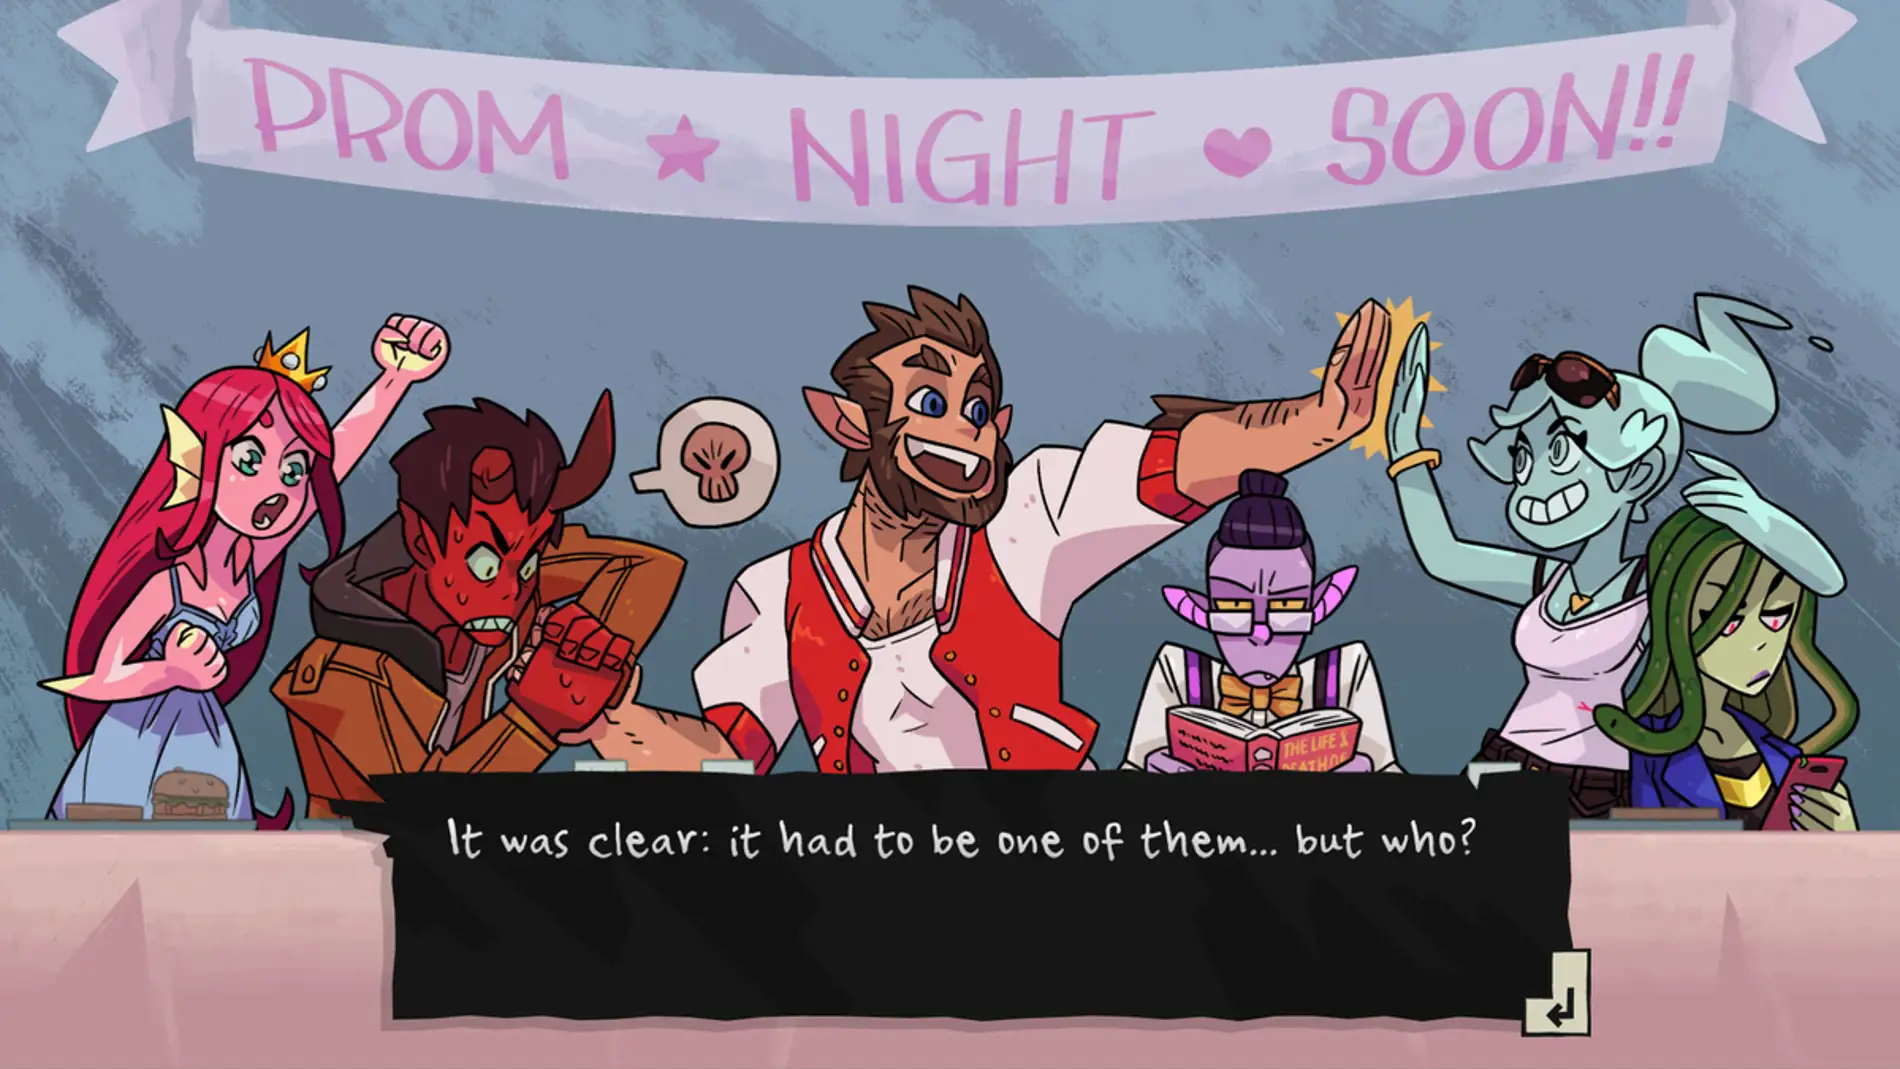 Monster Prom: Hotseat Edition